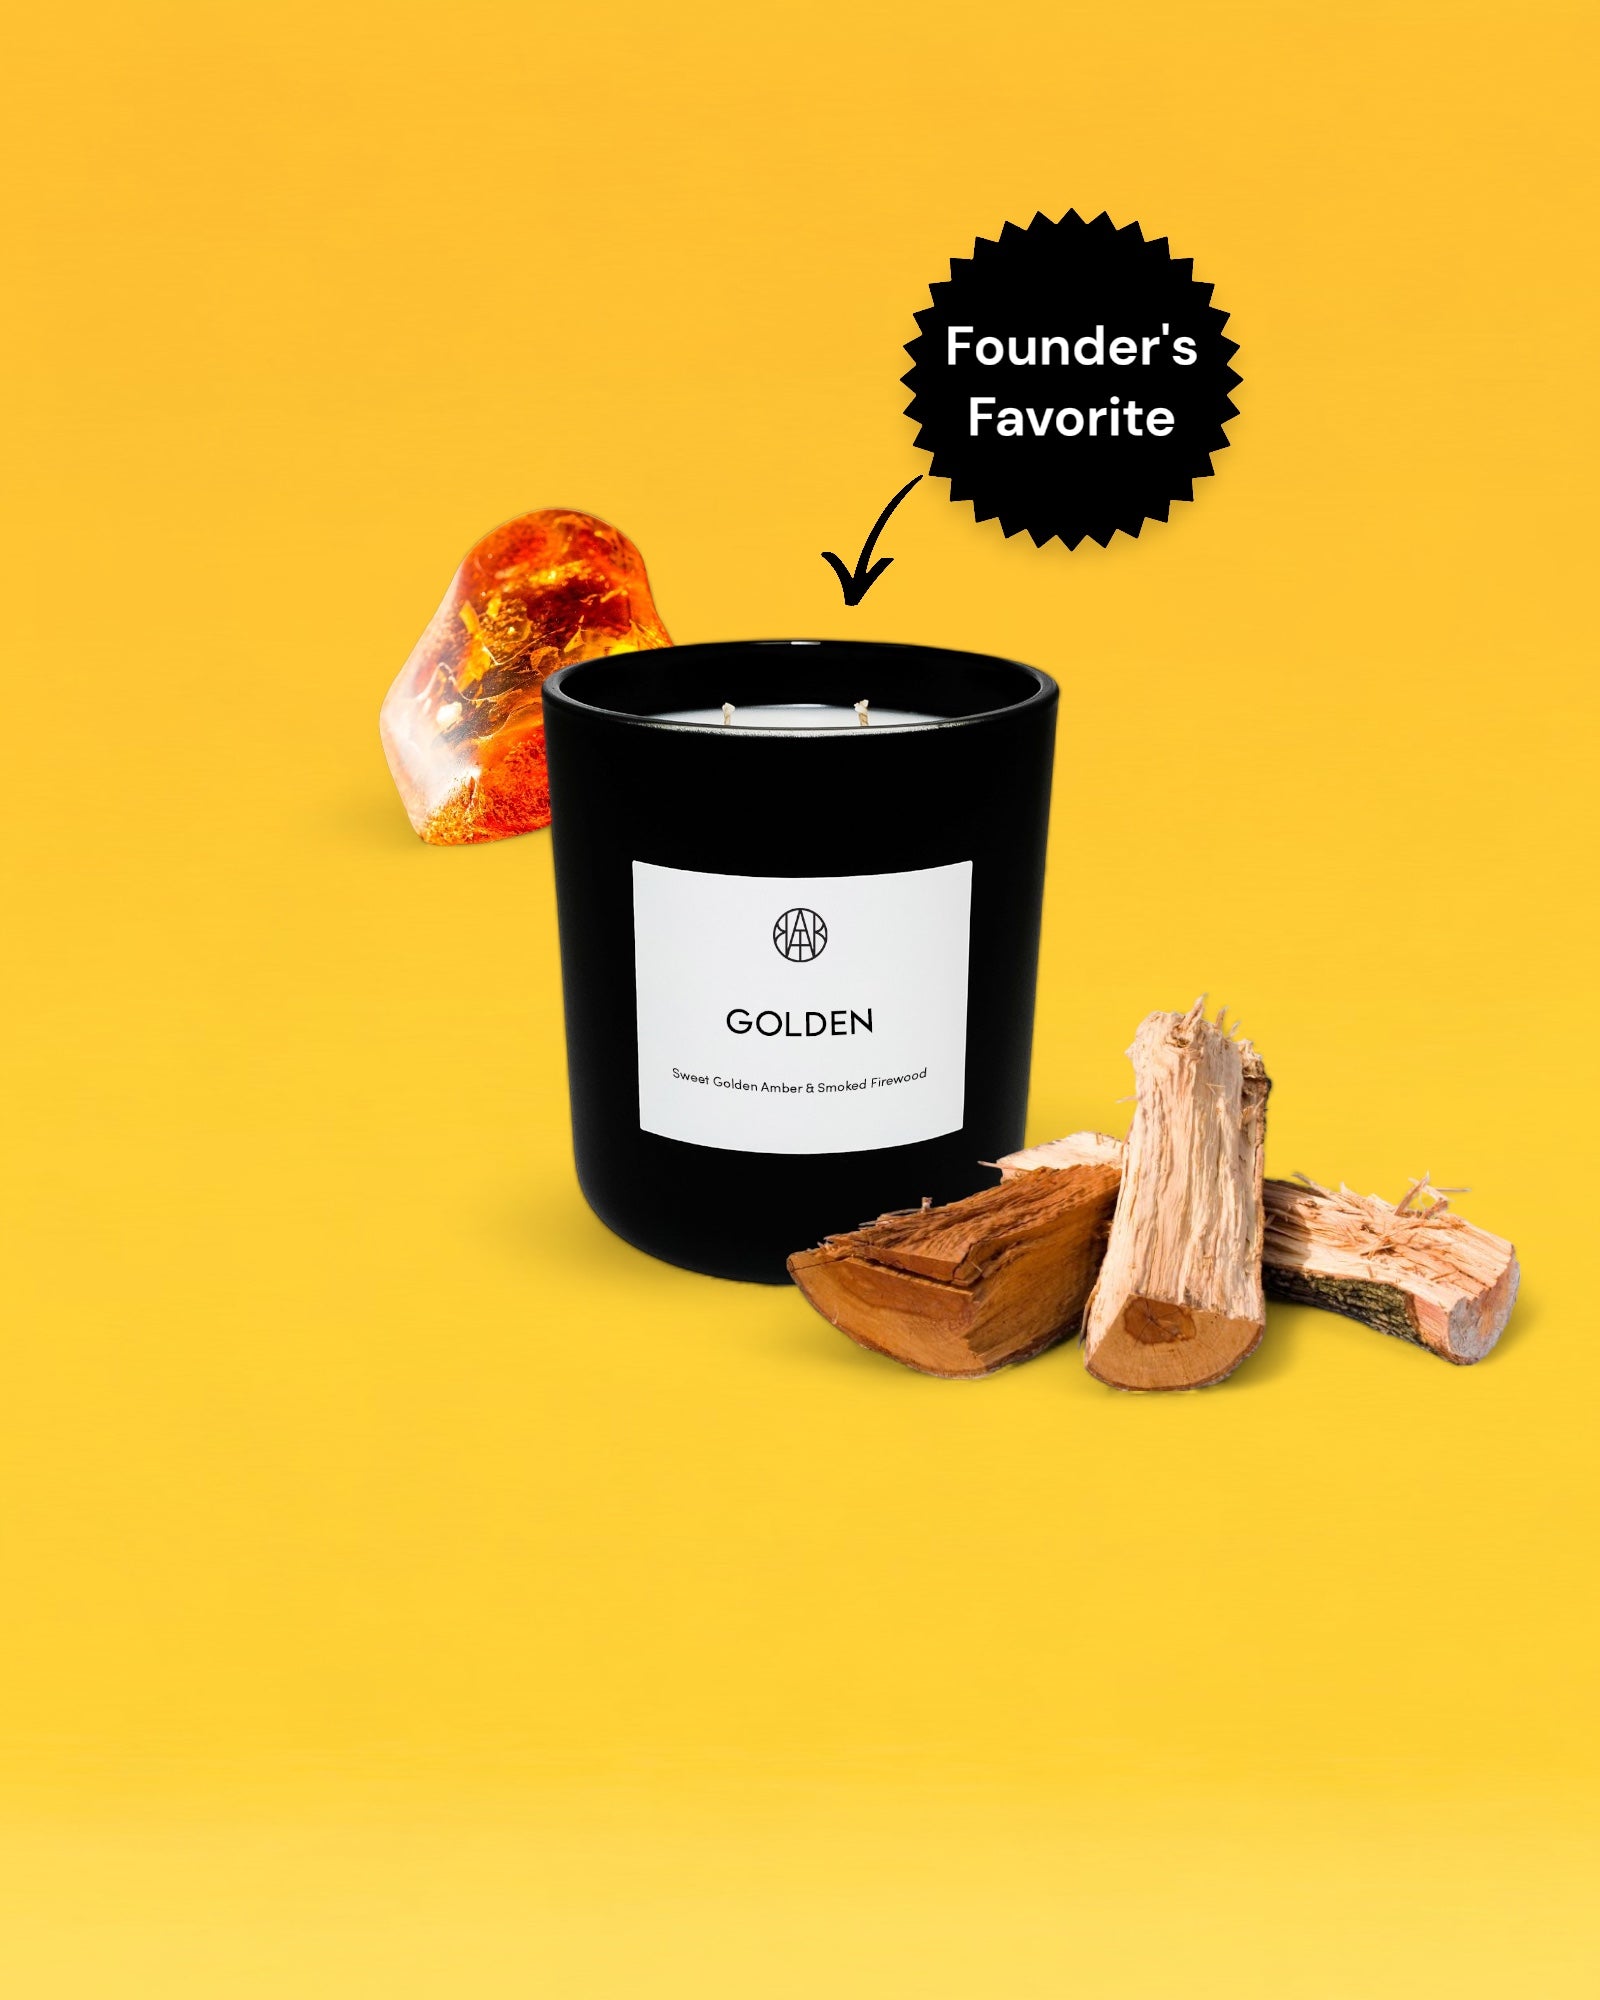 GOLDEN - Deluxe Candle - AEMBR - Clean Luxury Candles, Wax Melts & Laundry Care